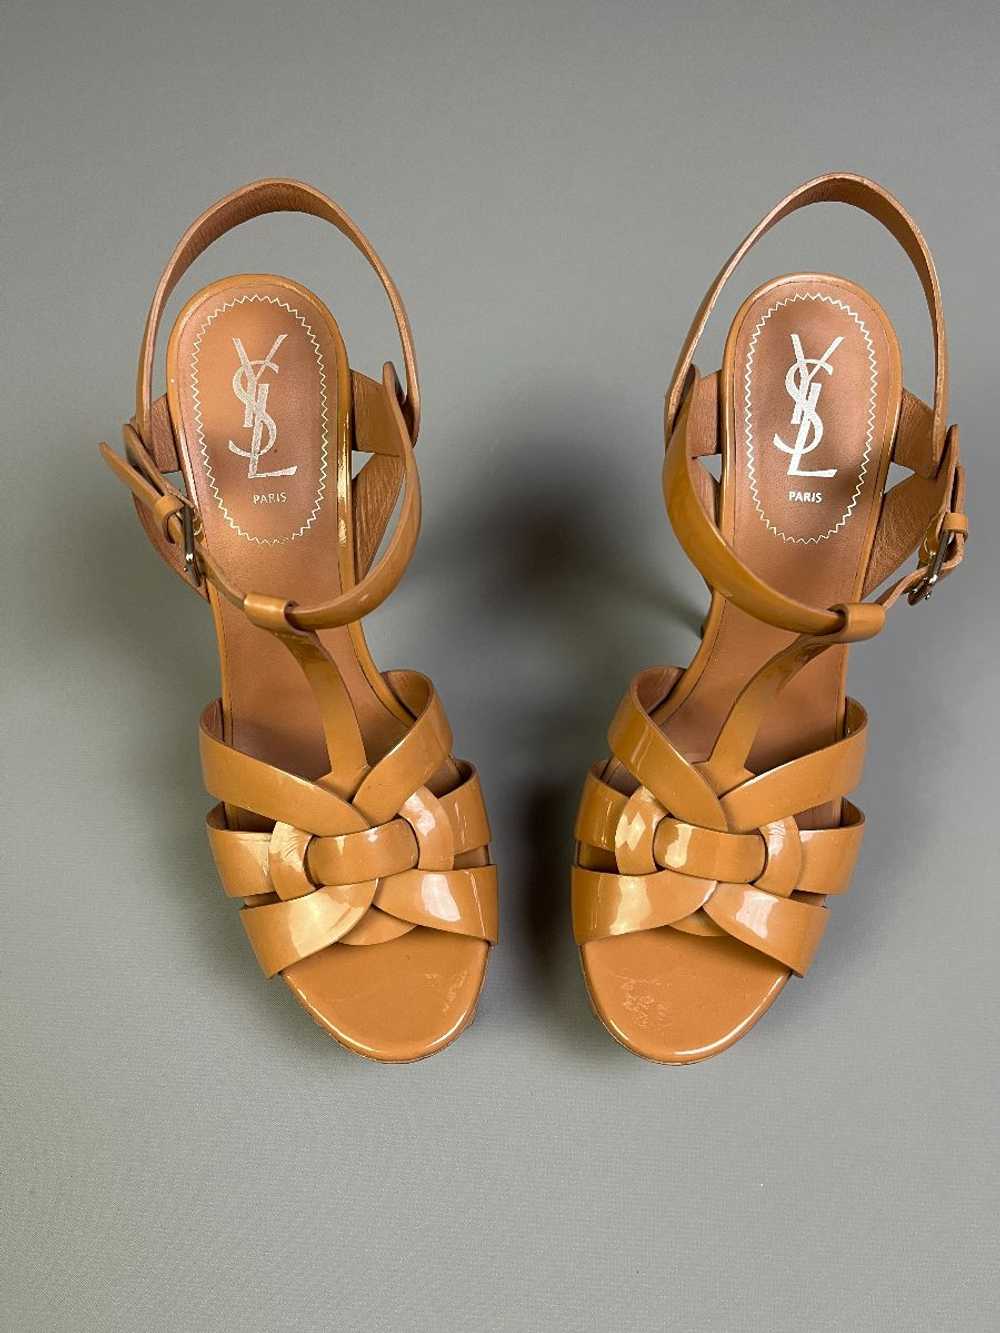 YSL NUDE PATENT LEATHER STRAPPY HEELS WRAP AROUND… - image 4